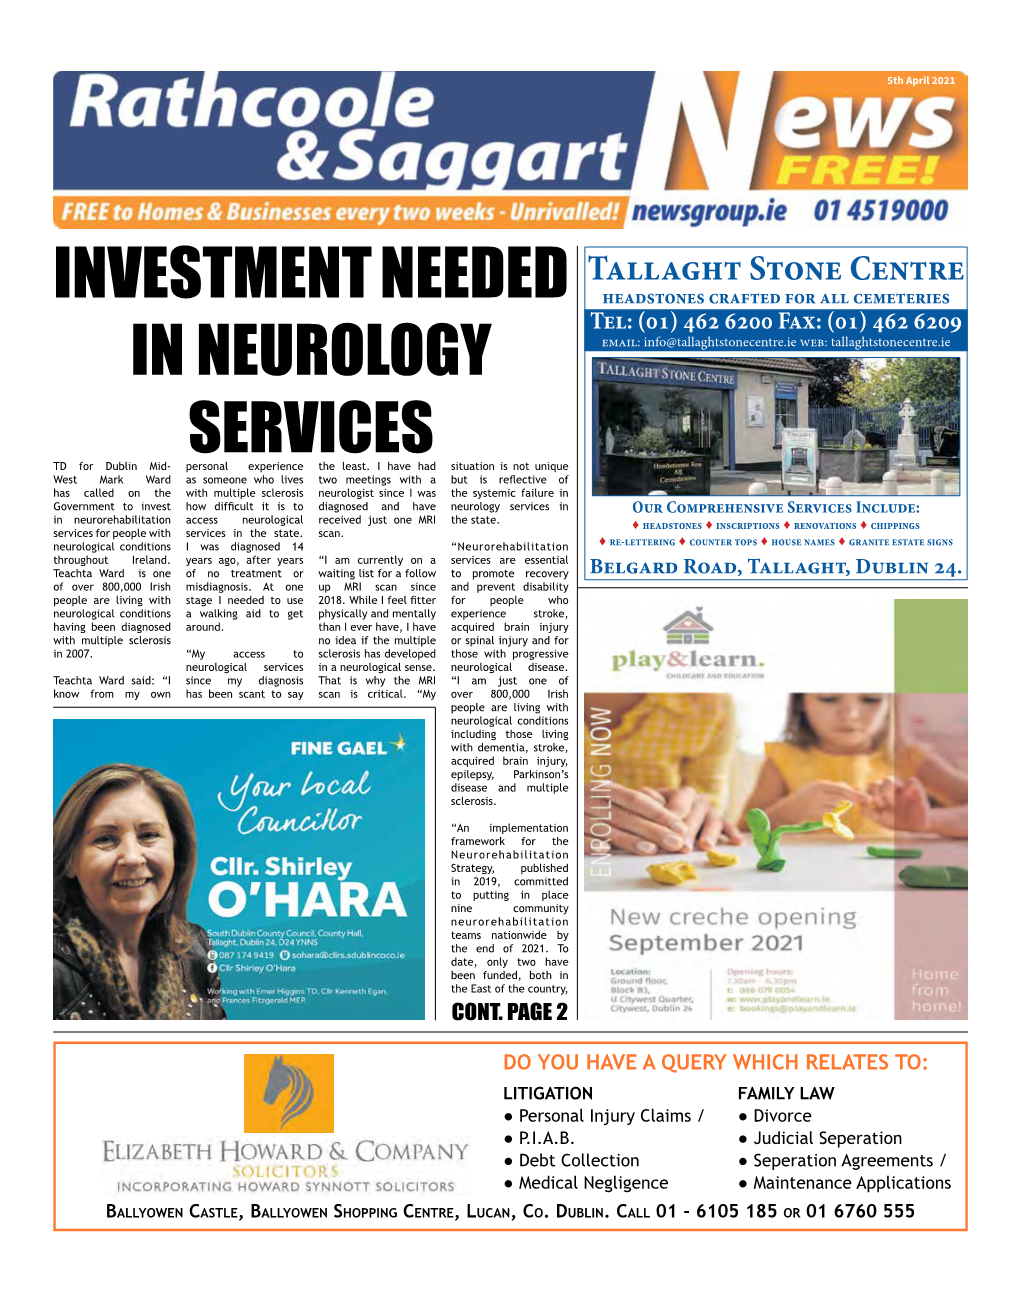 Investment Needed in Neurology Services